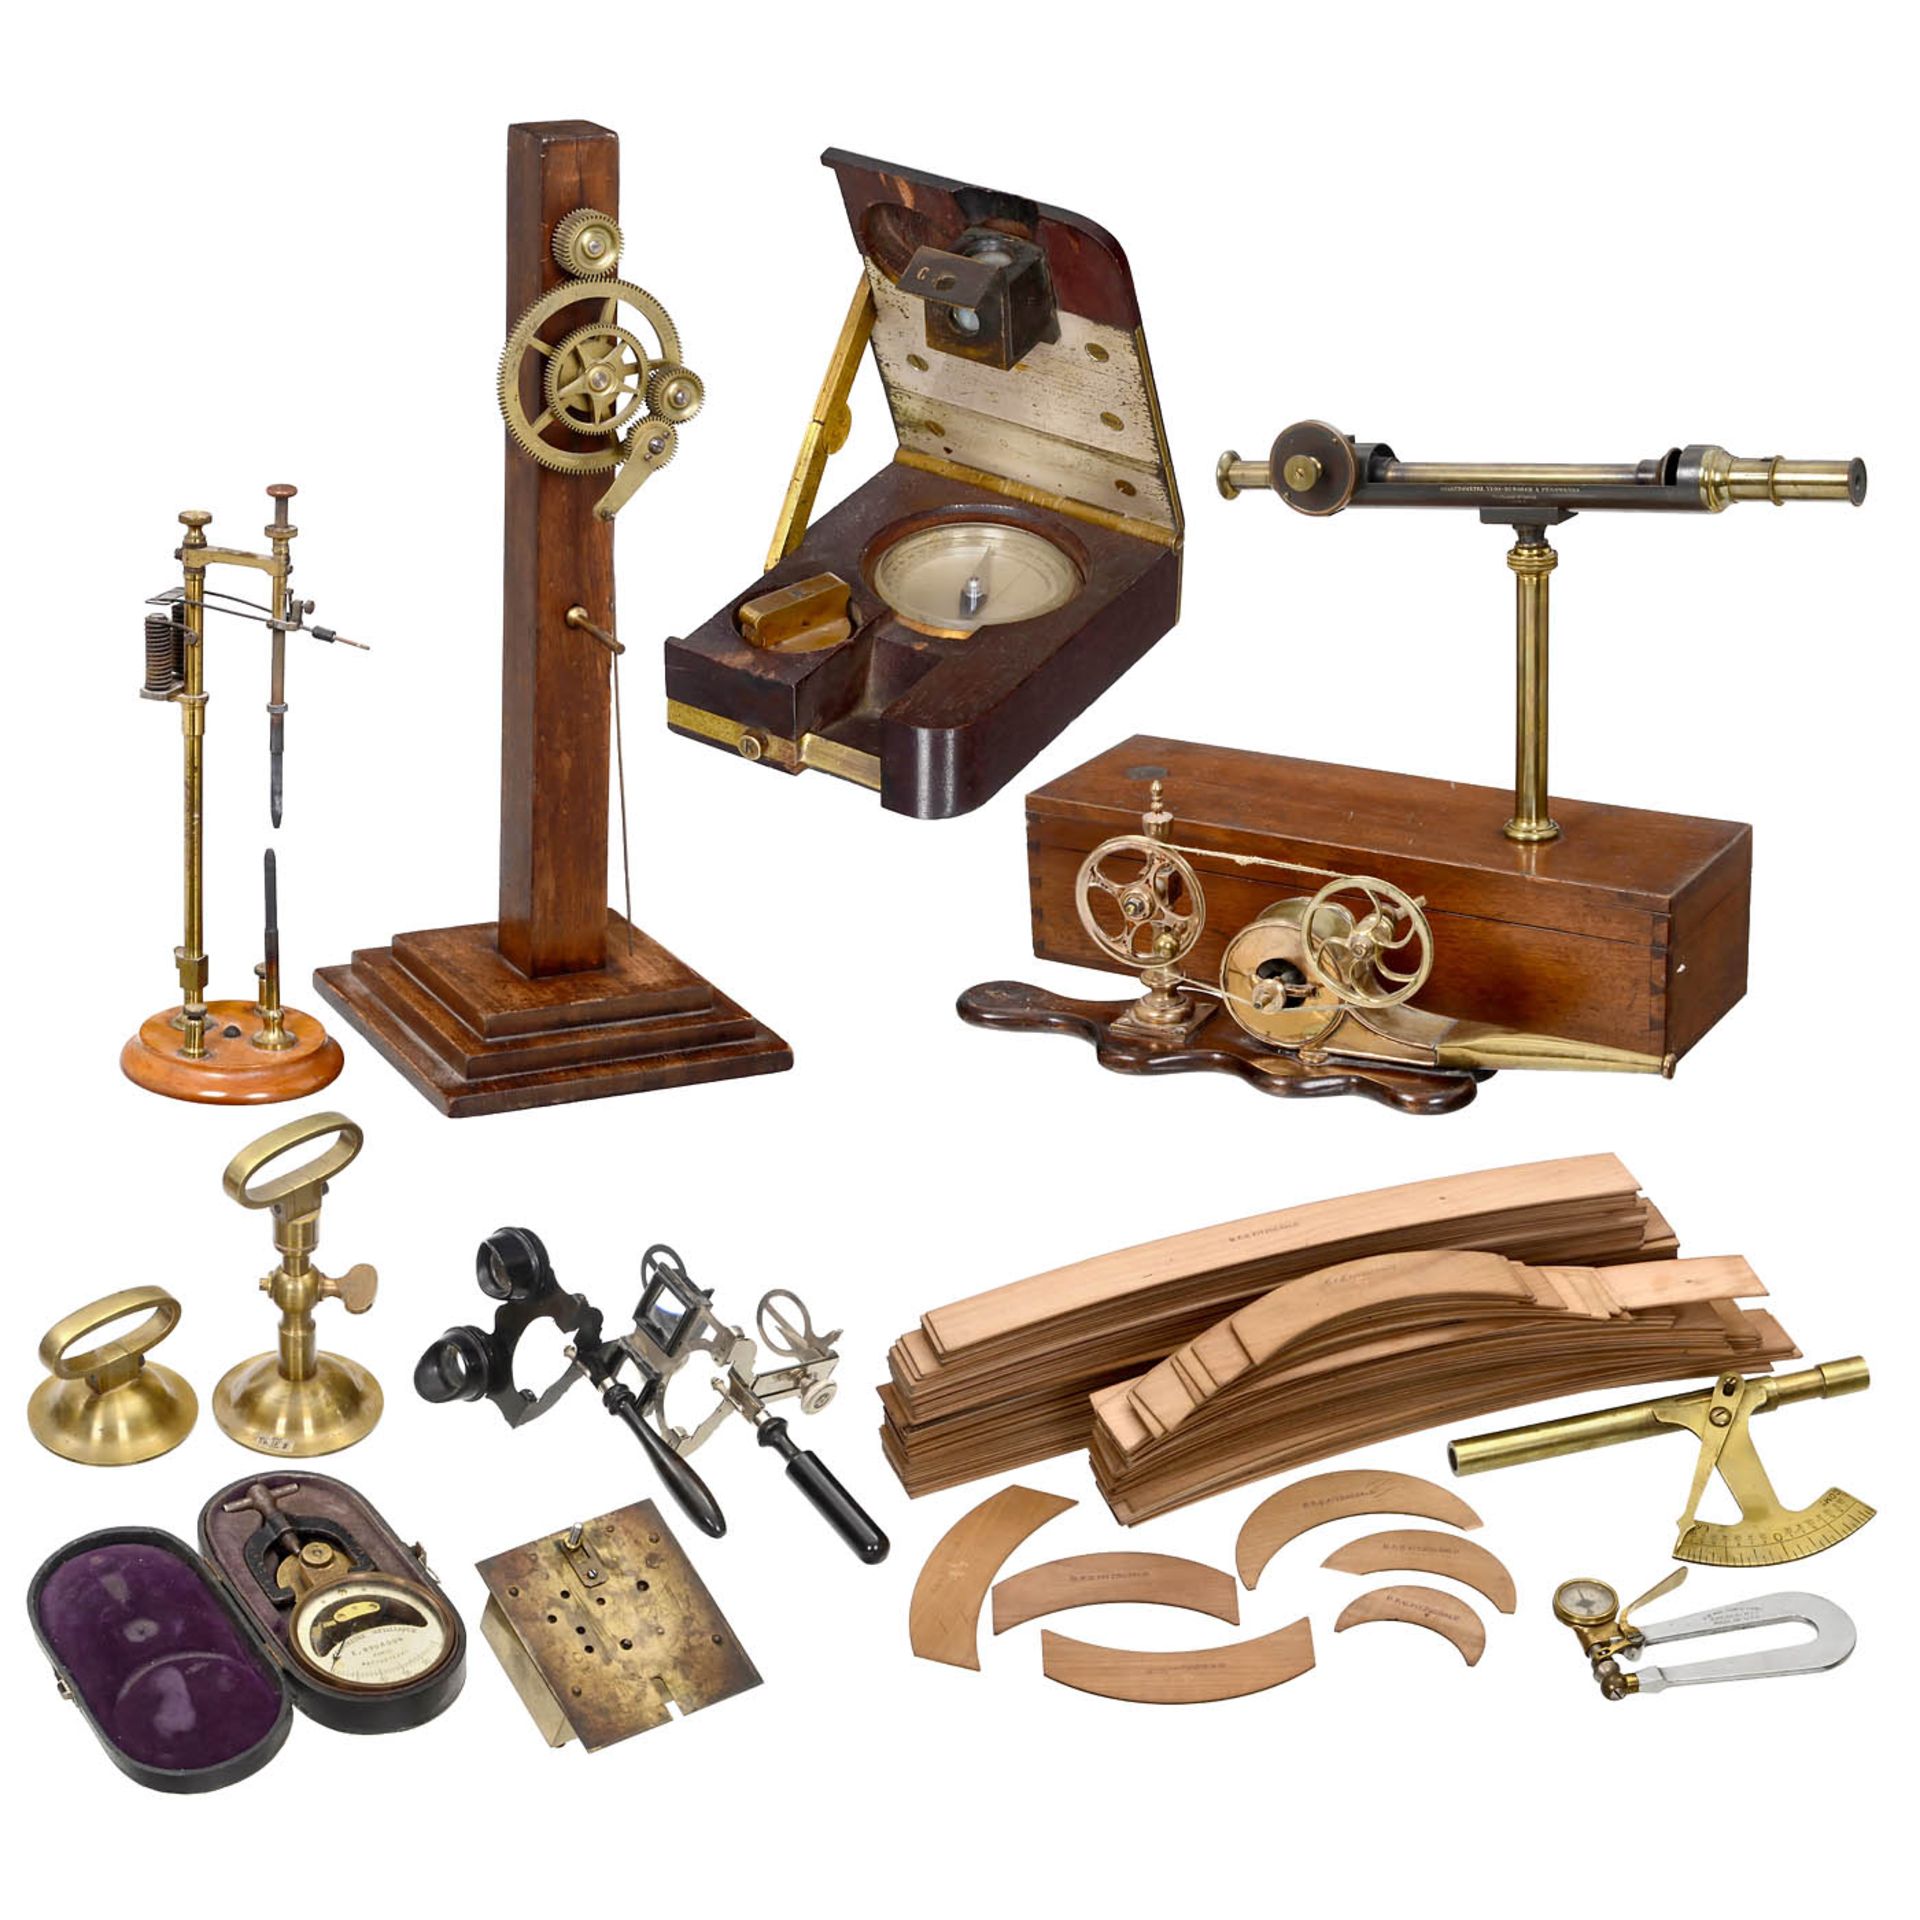 Collection of Physical Demonstration Models and Technical Devices